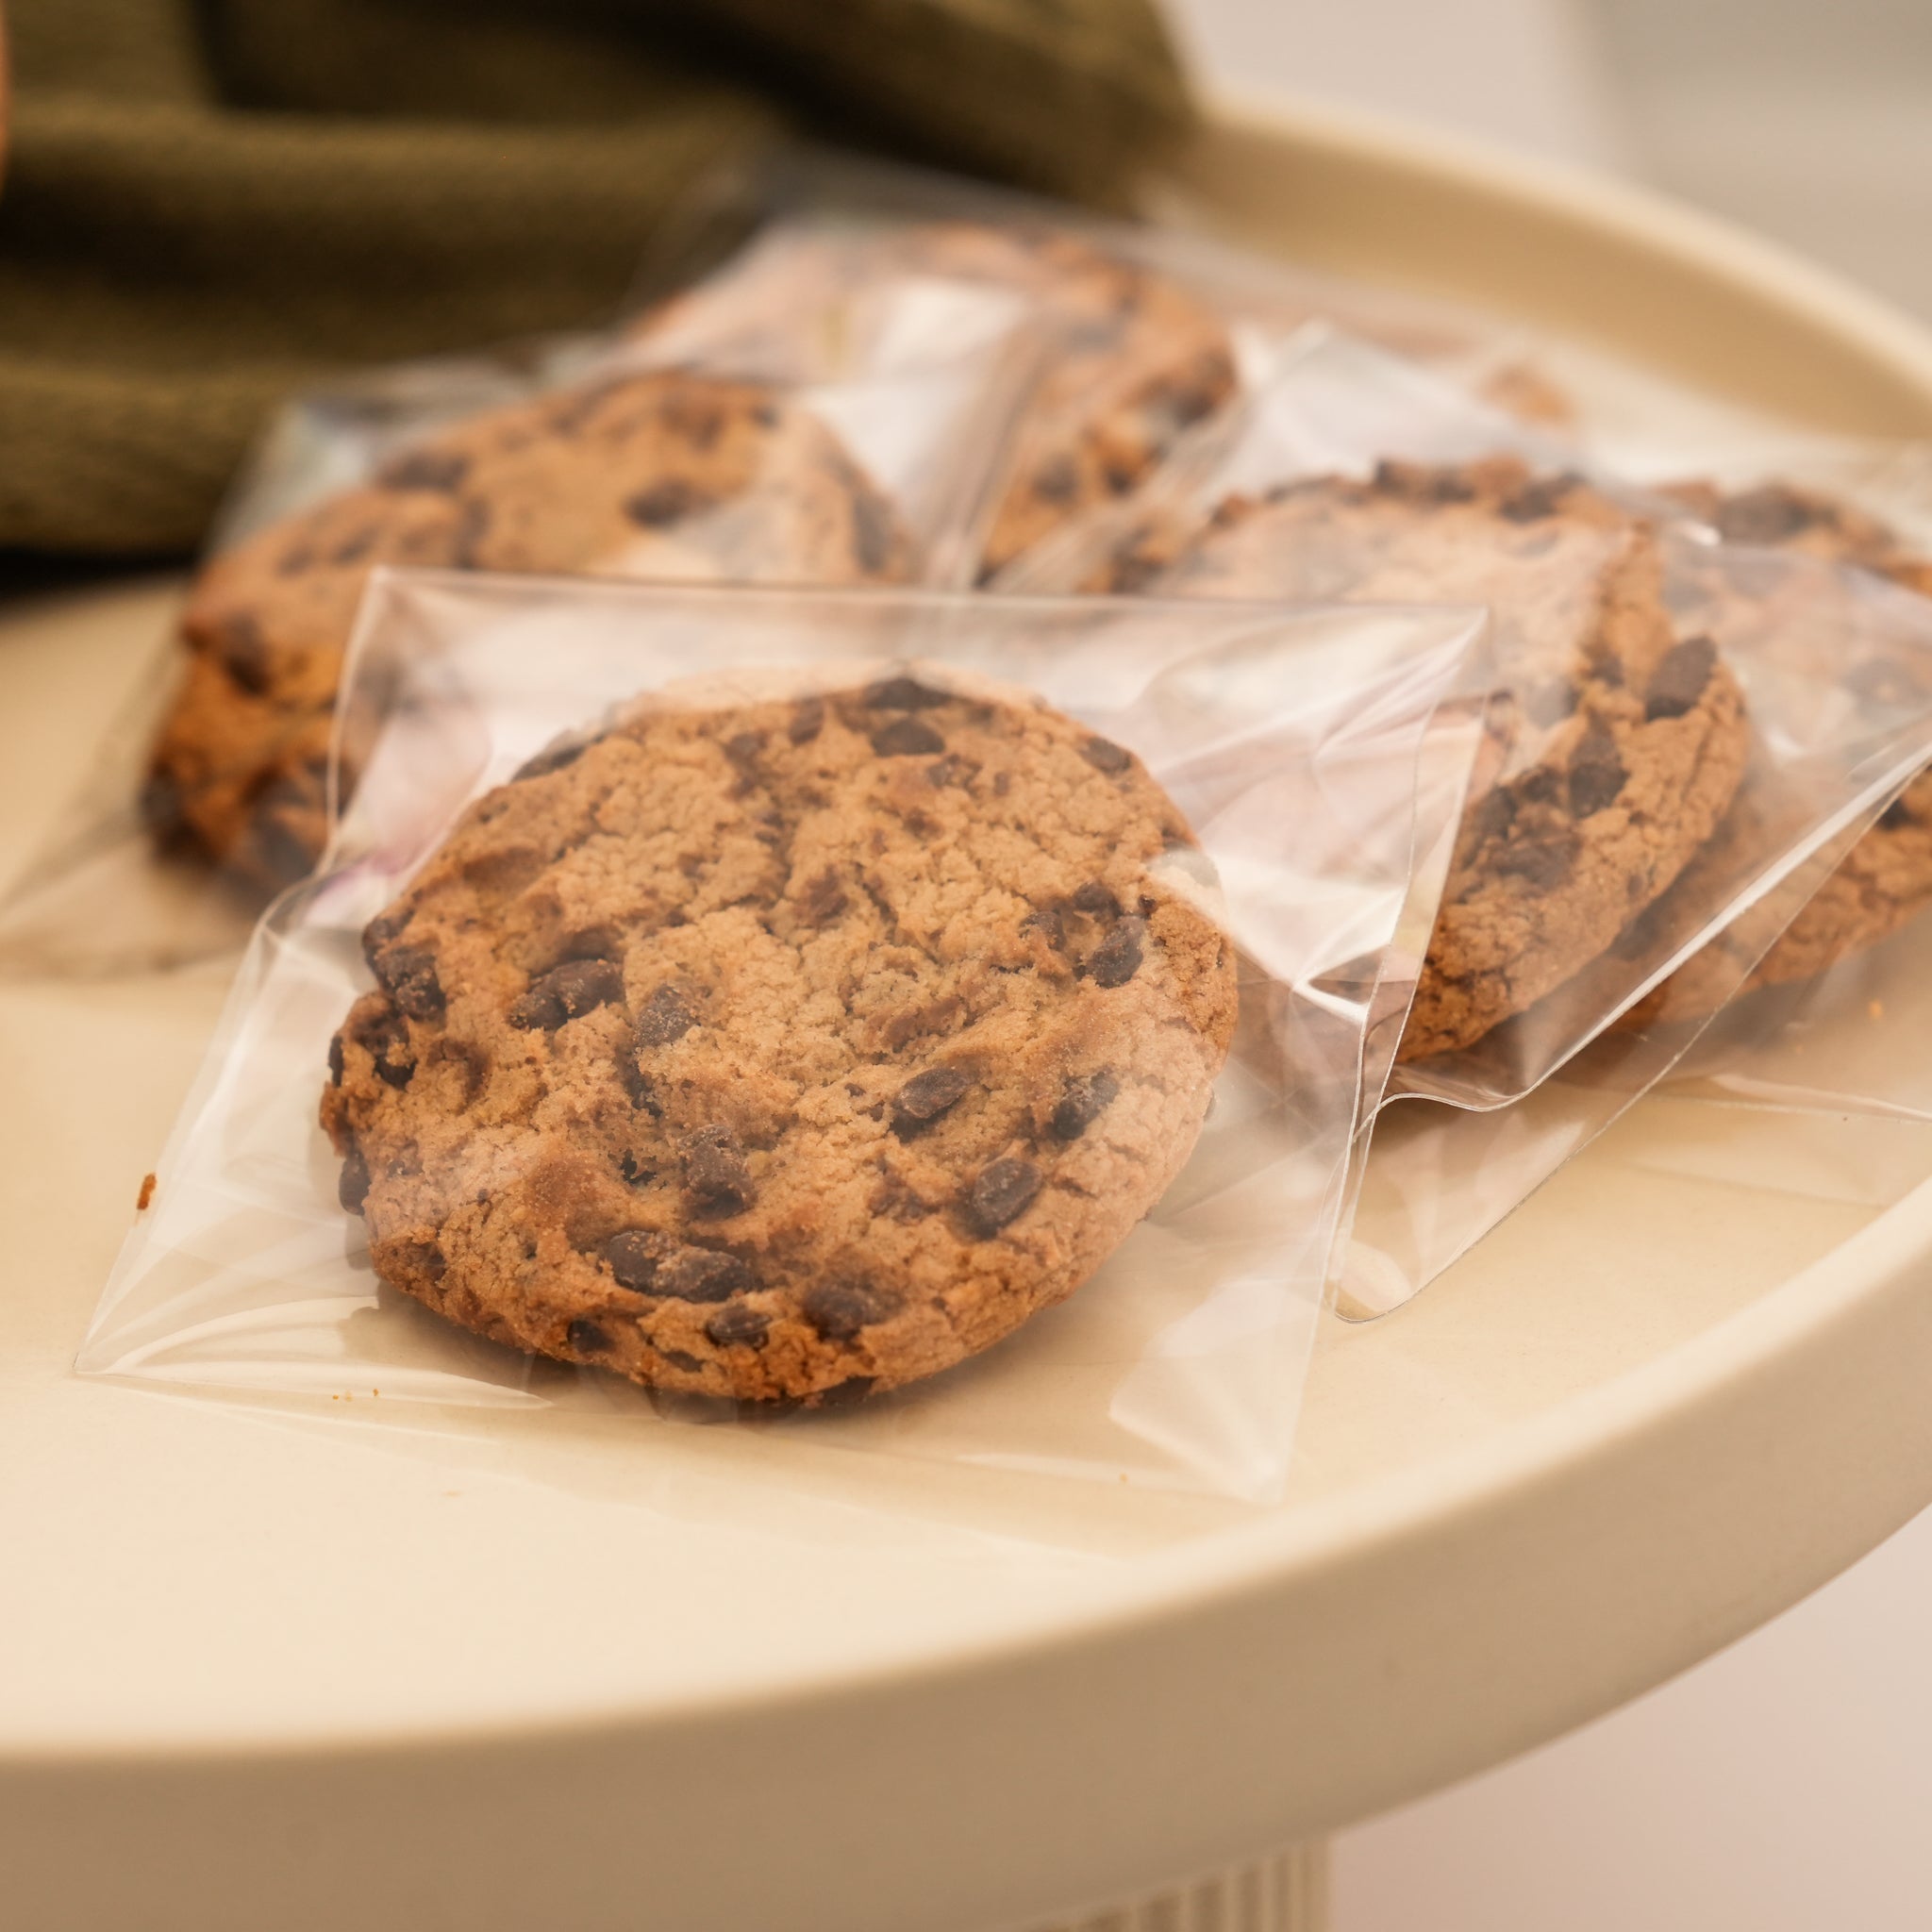 LOYAL Resealable Cookie Bag 90x90mm (3.5x3.5in)